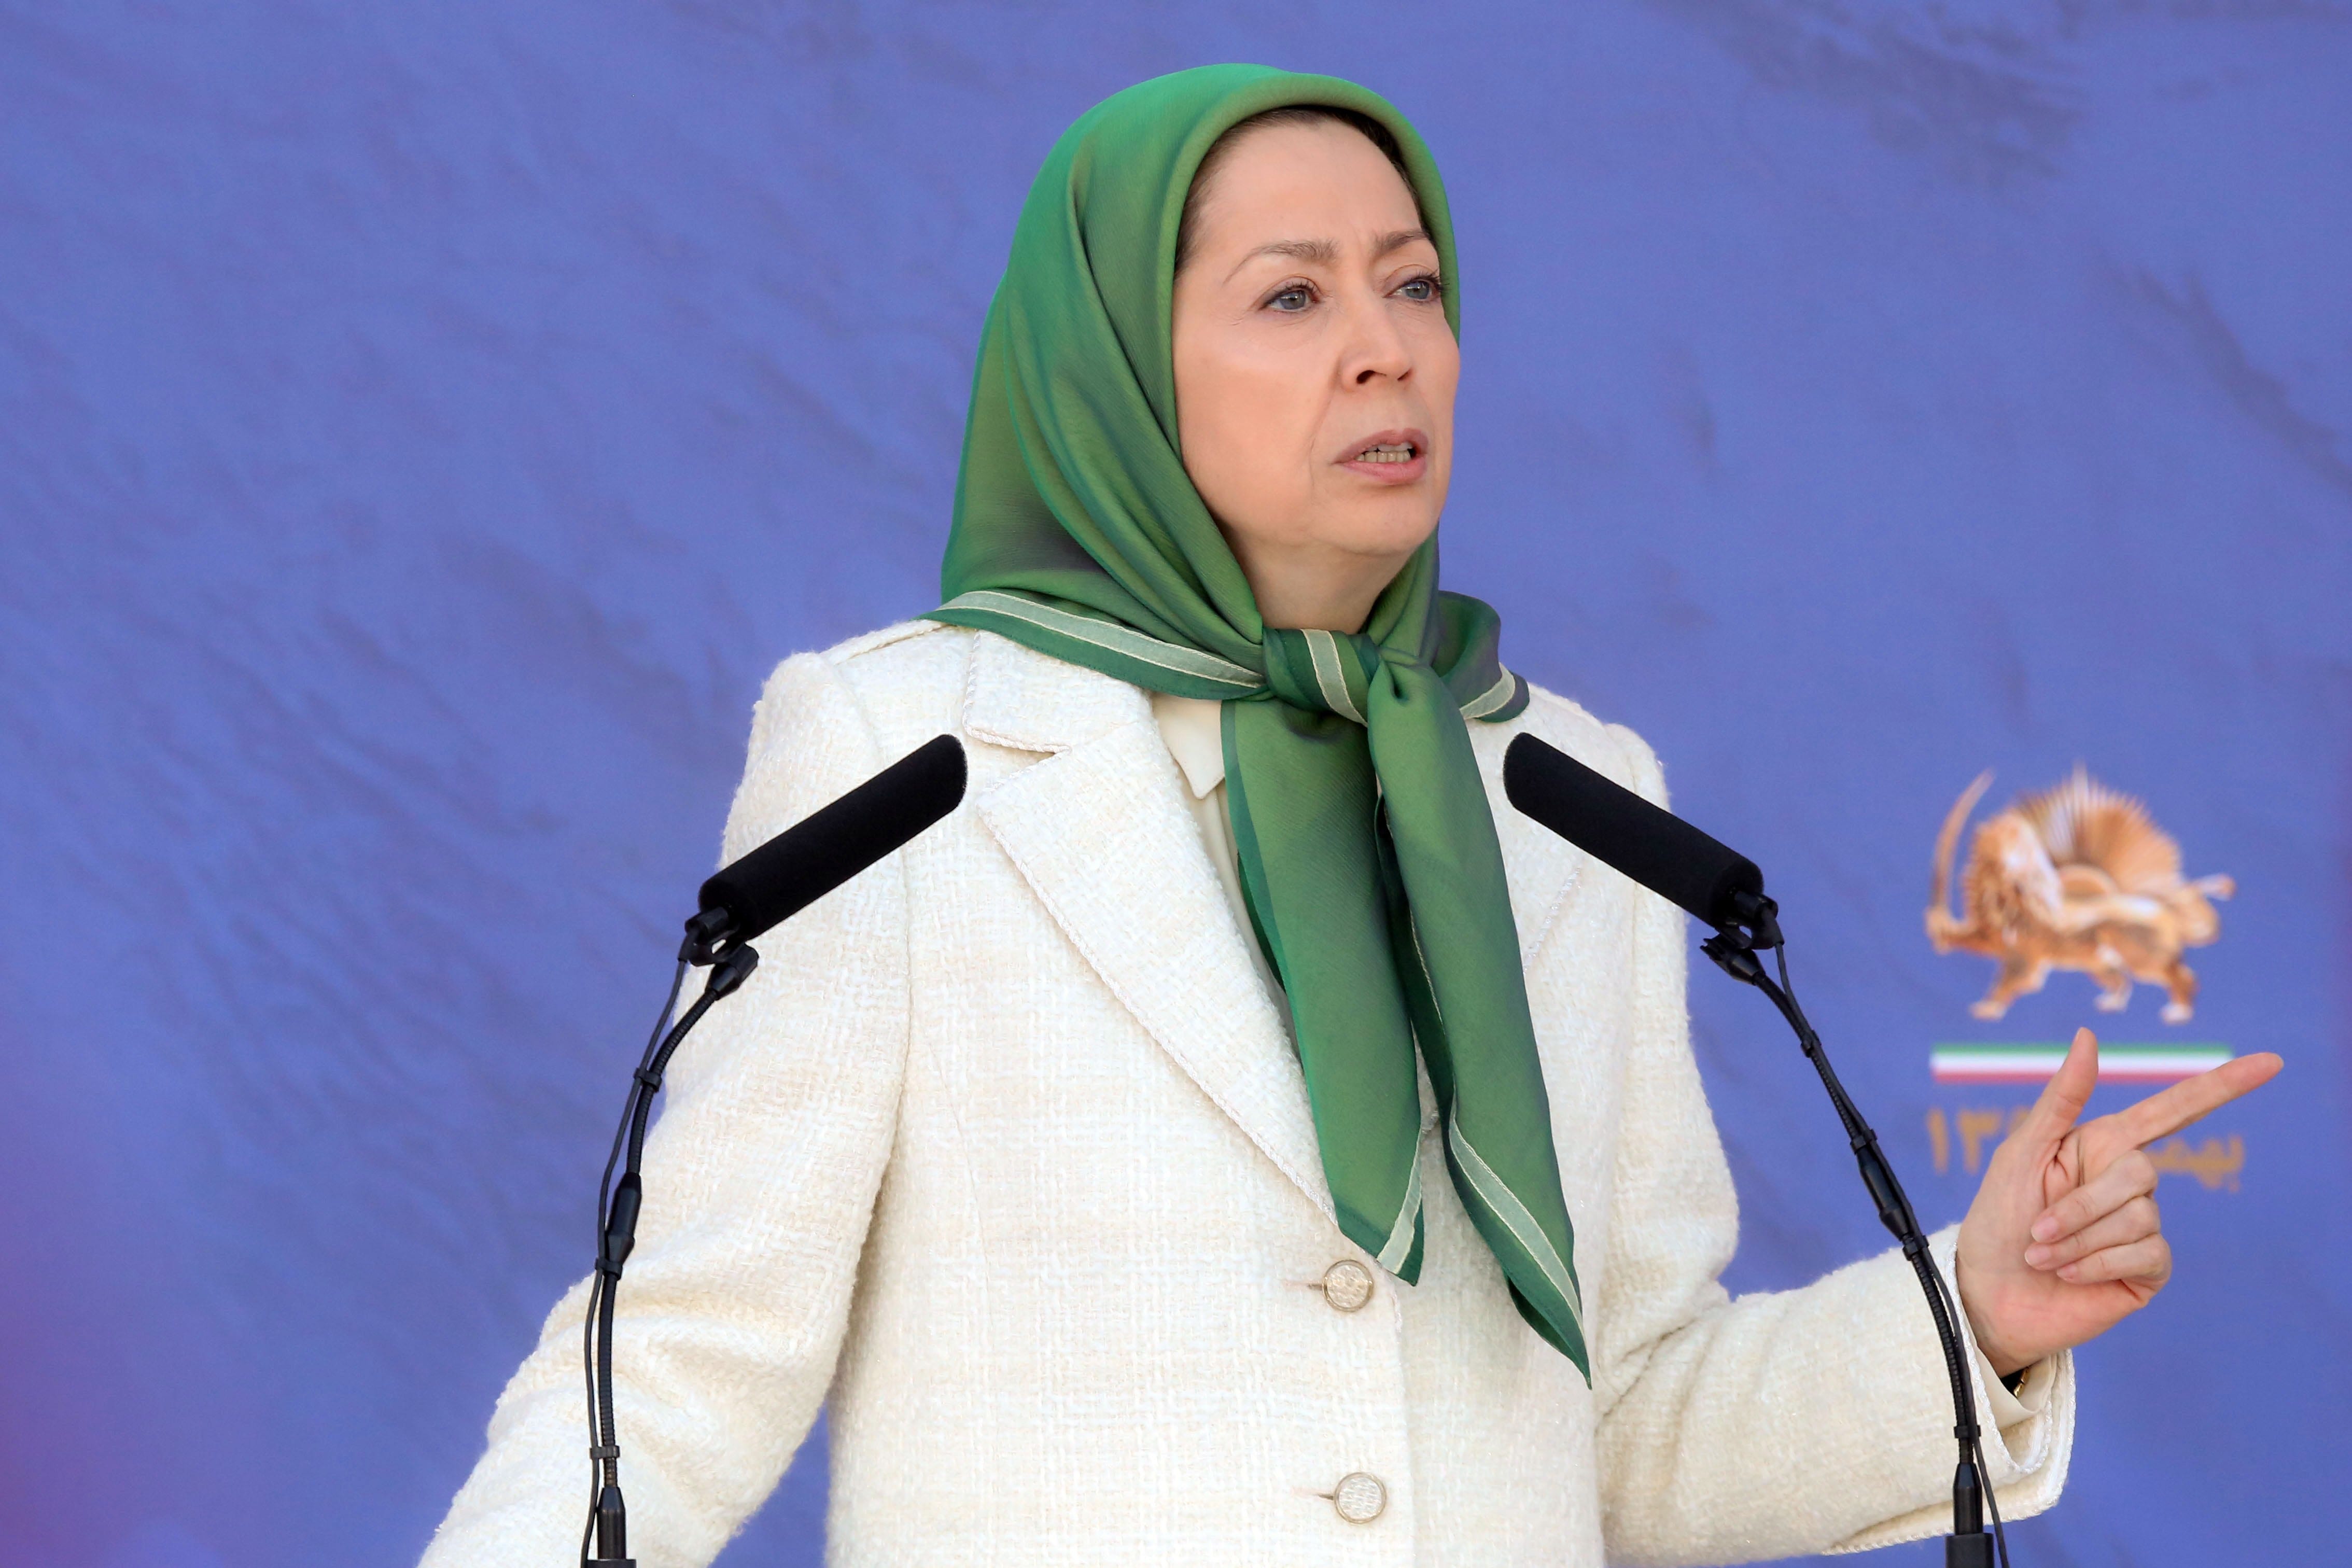 Iranian resistance leader says regime is “at its weakest”, urges Biden to hold him accountable